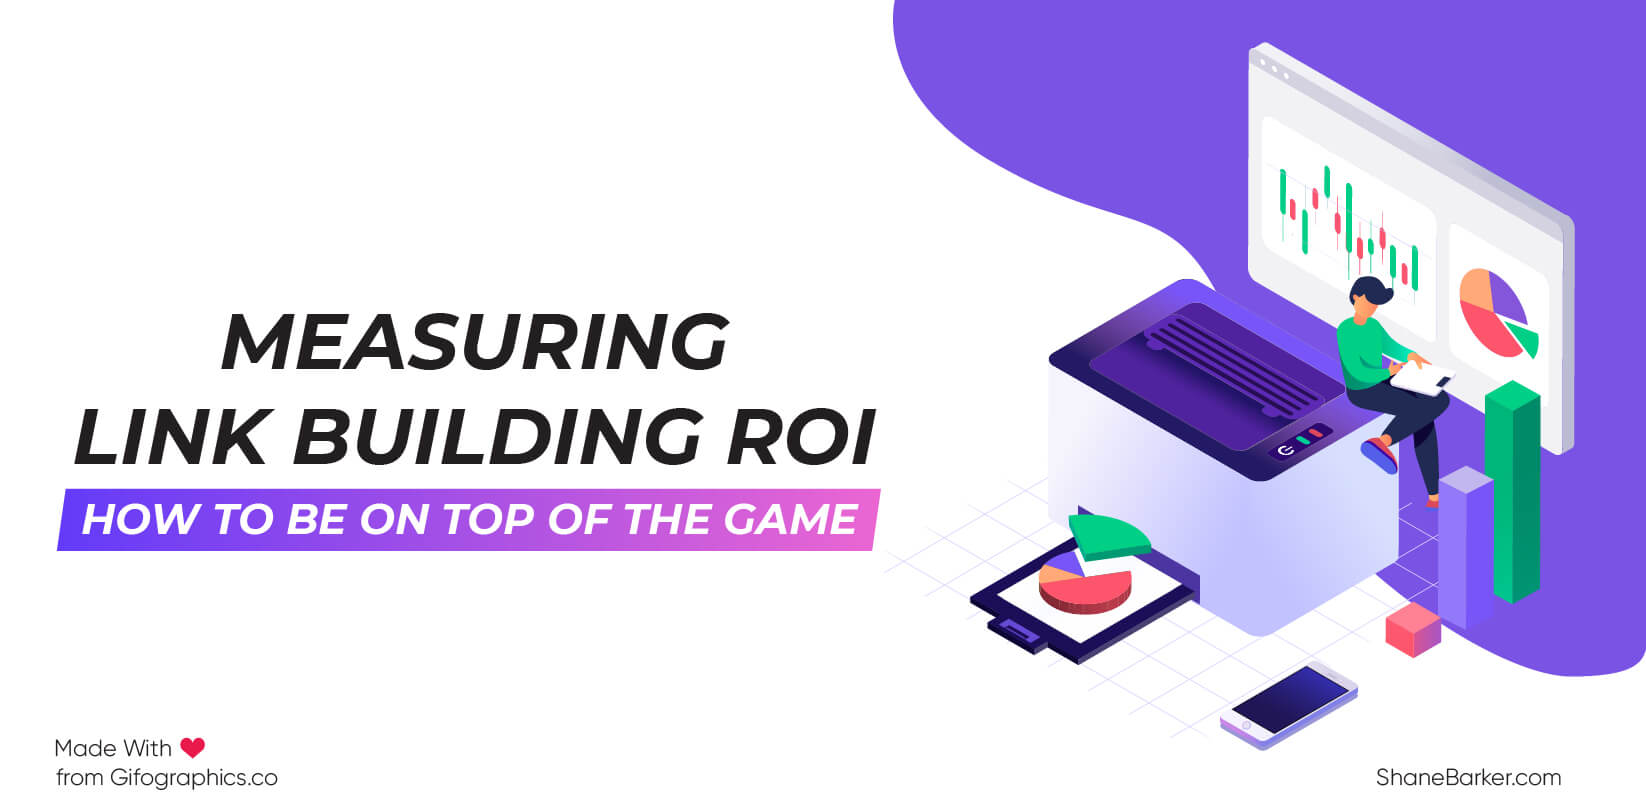 measuring link building roi: how to be on top of the game